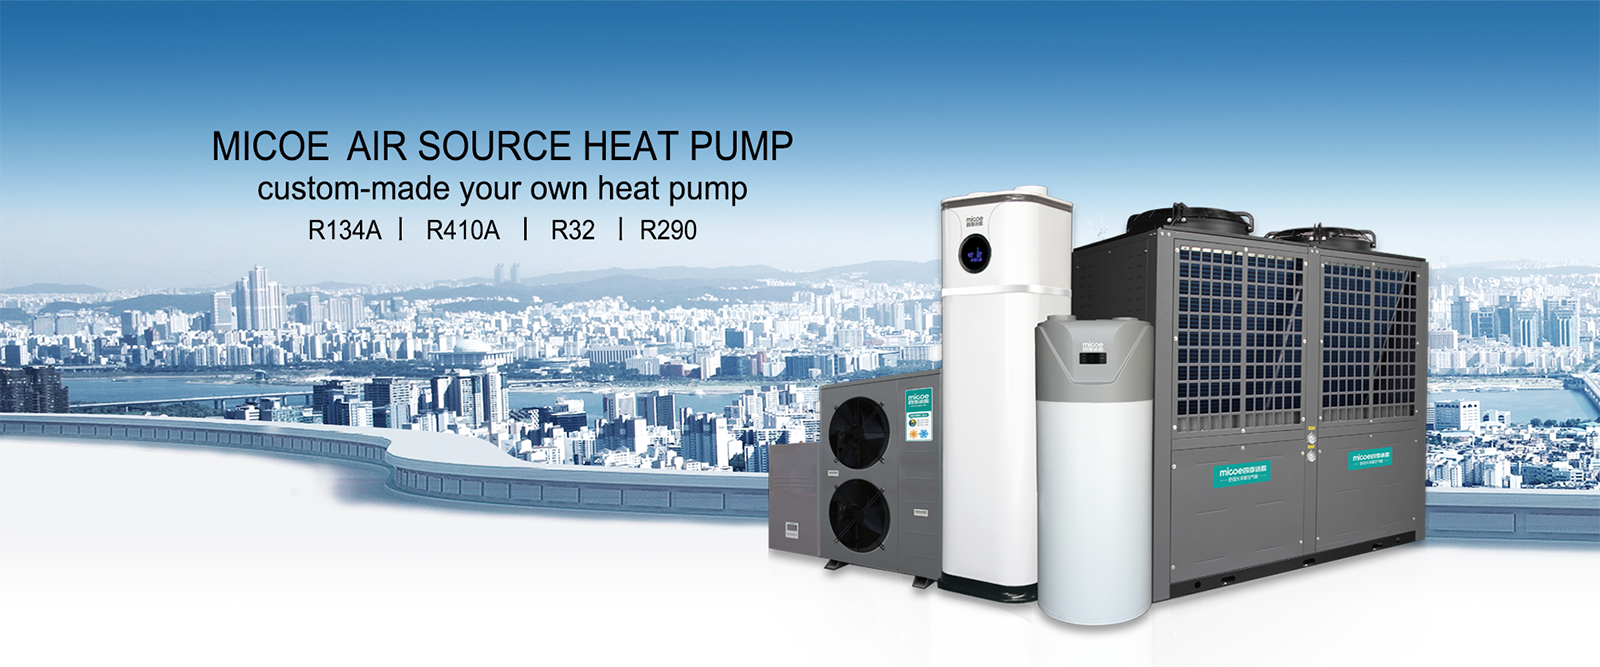 R410a hot water heat pump for residential